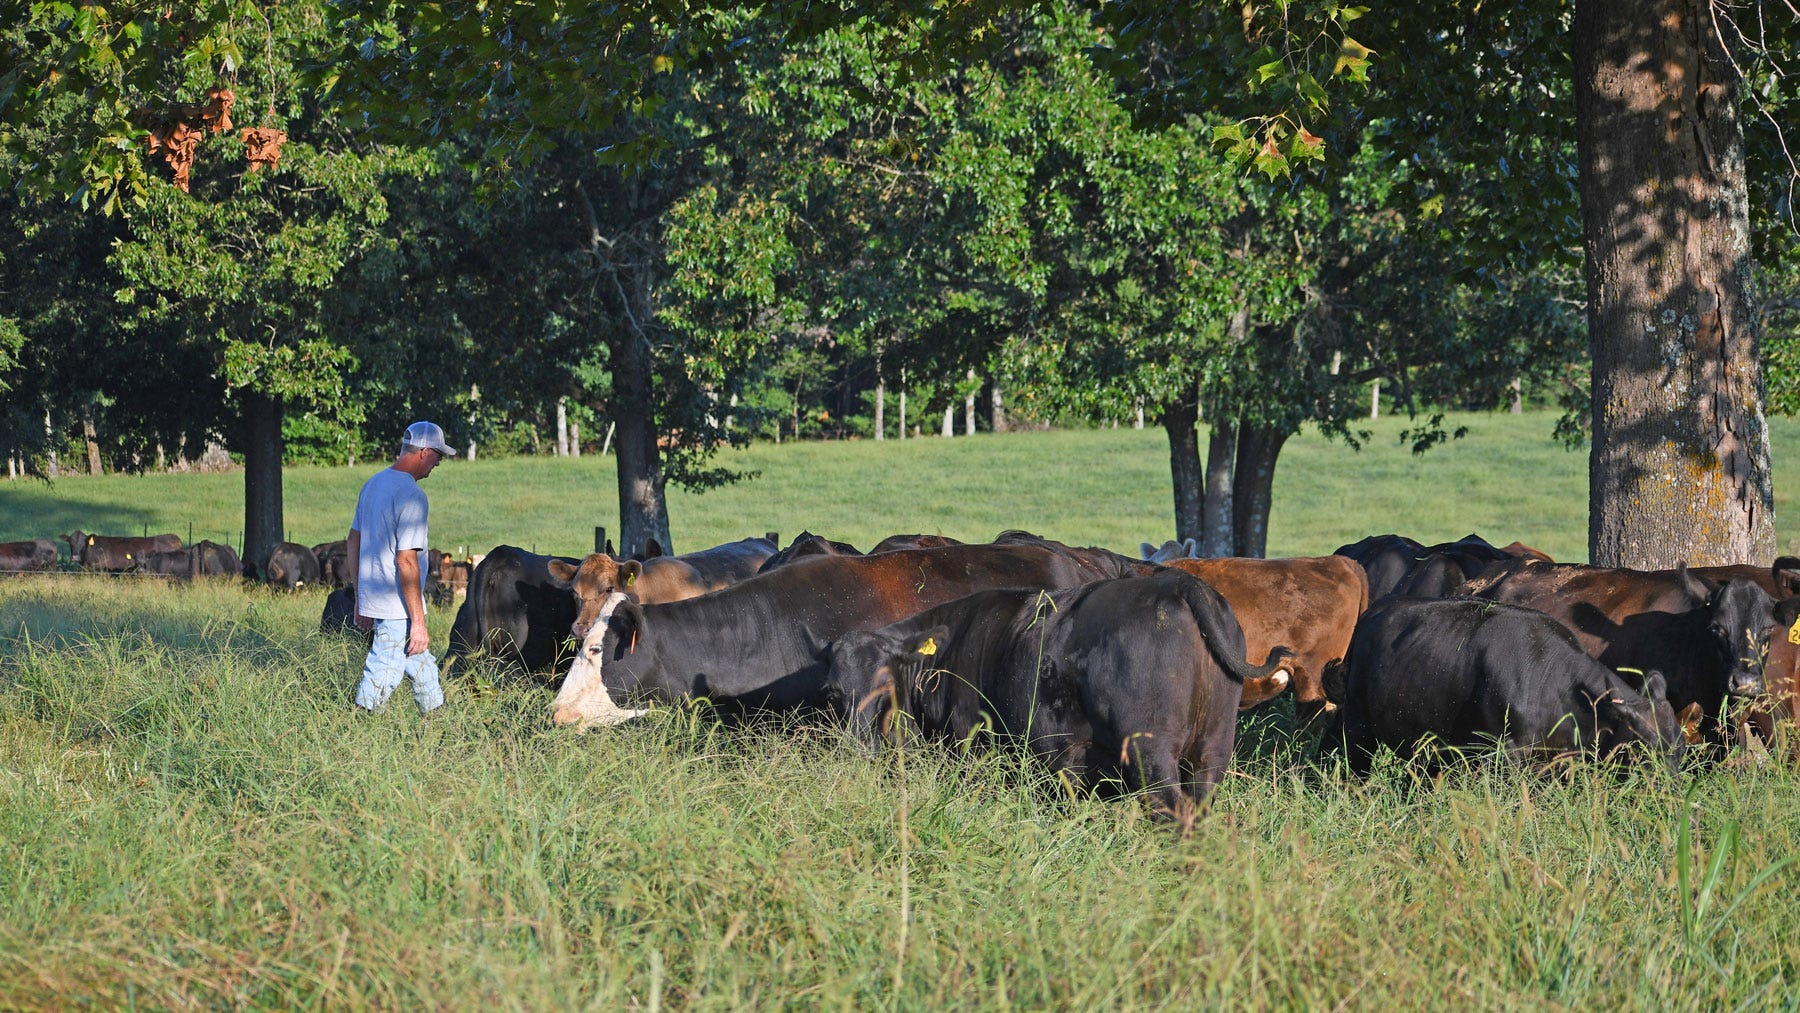 Farmer checking a herd of cattle grazing underneath shade trees.